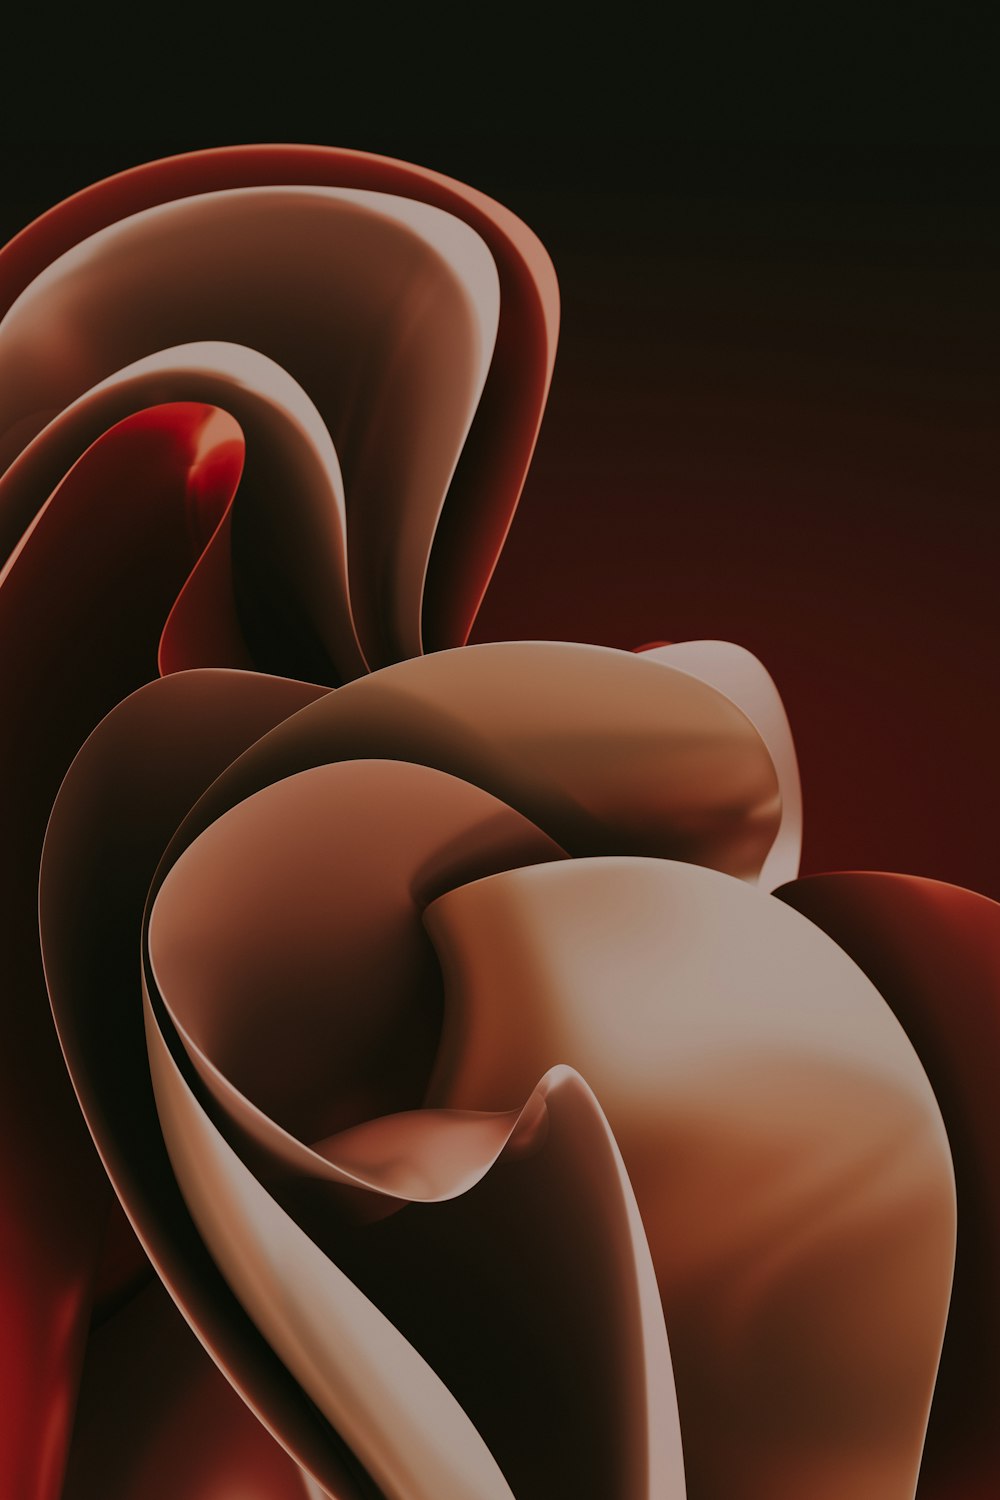 a computer generated image of a red flower